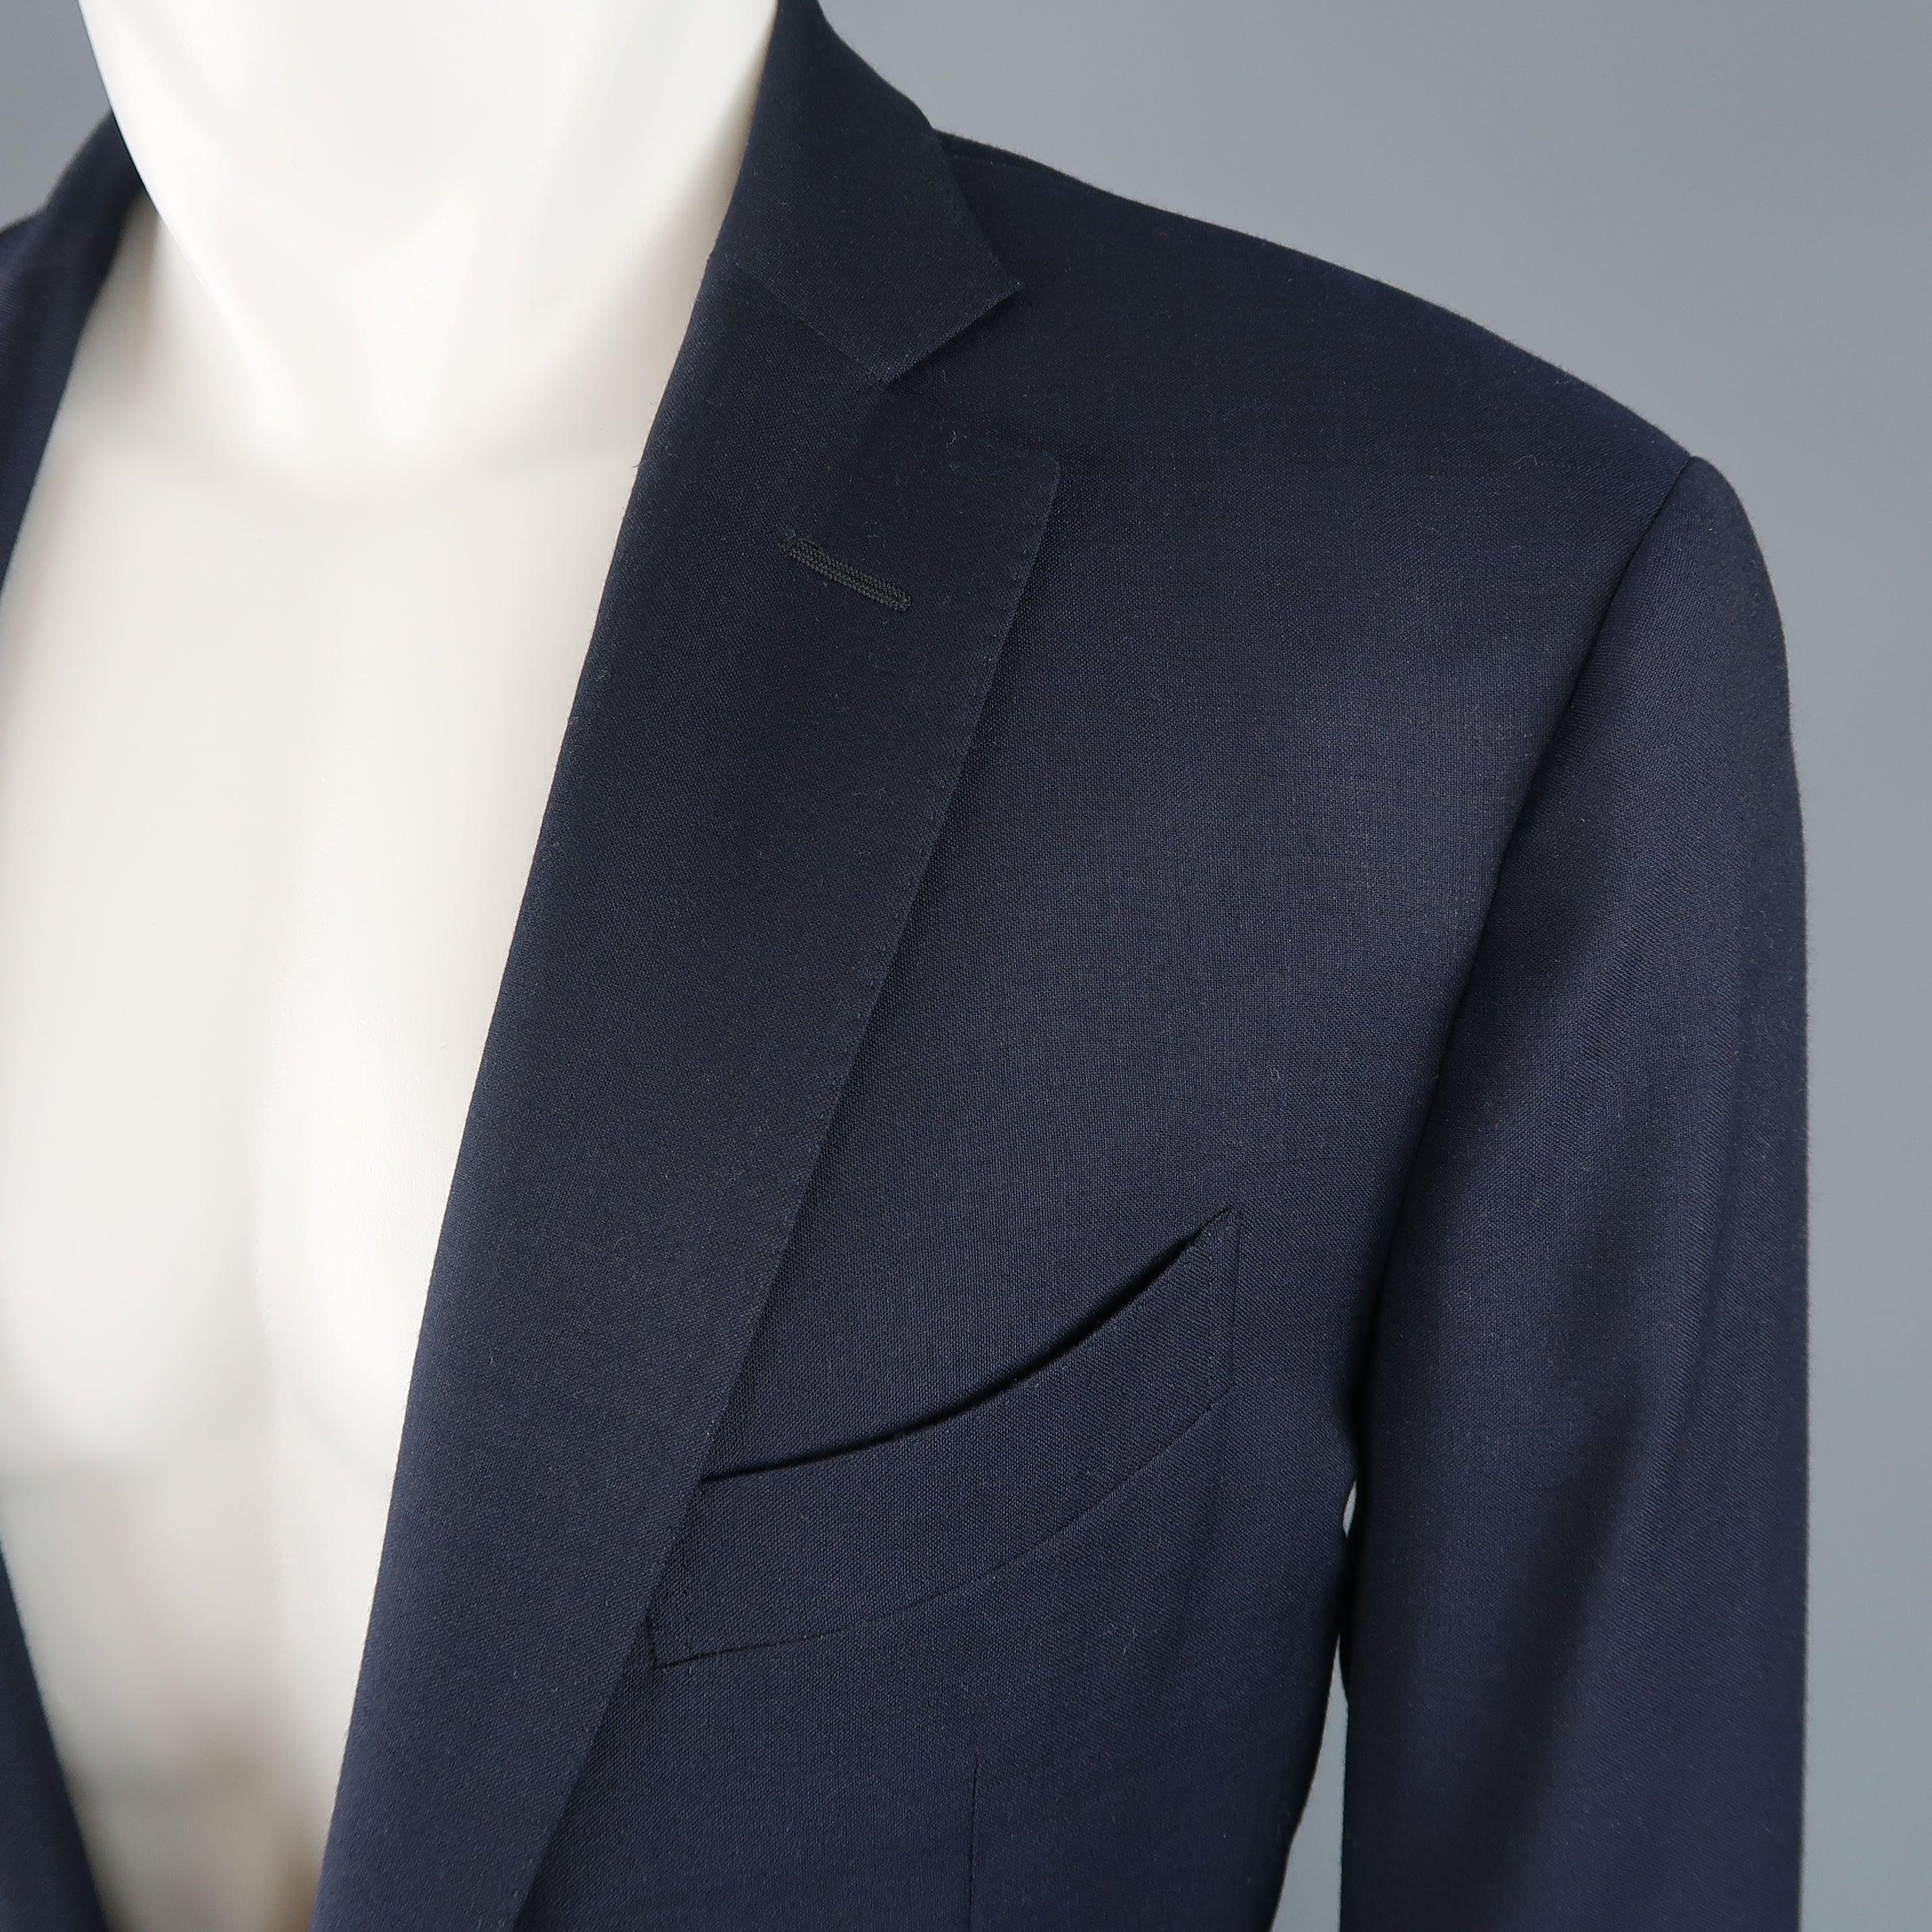 Single breasted ERMENEGILDO ZEGNA sport coat comes in navy wool with a notch lapel, two button front, glenplaid liner, and top stitching throughout. Made in Italy.
 Good Pre-Owned Condition.
  
 

 Marked:  IT 54
  
 

 Measurements: 
  
 l